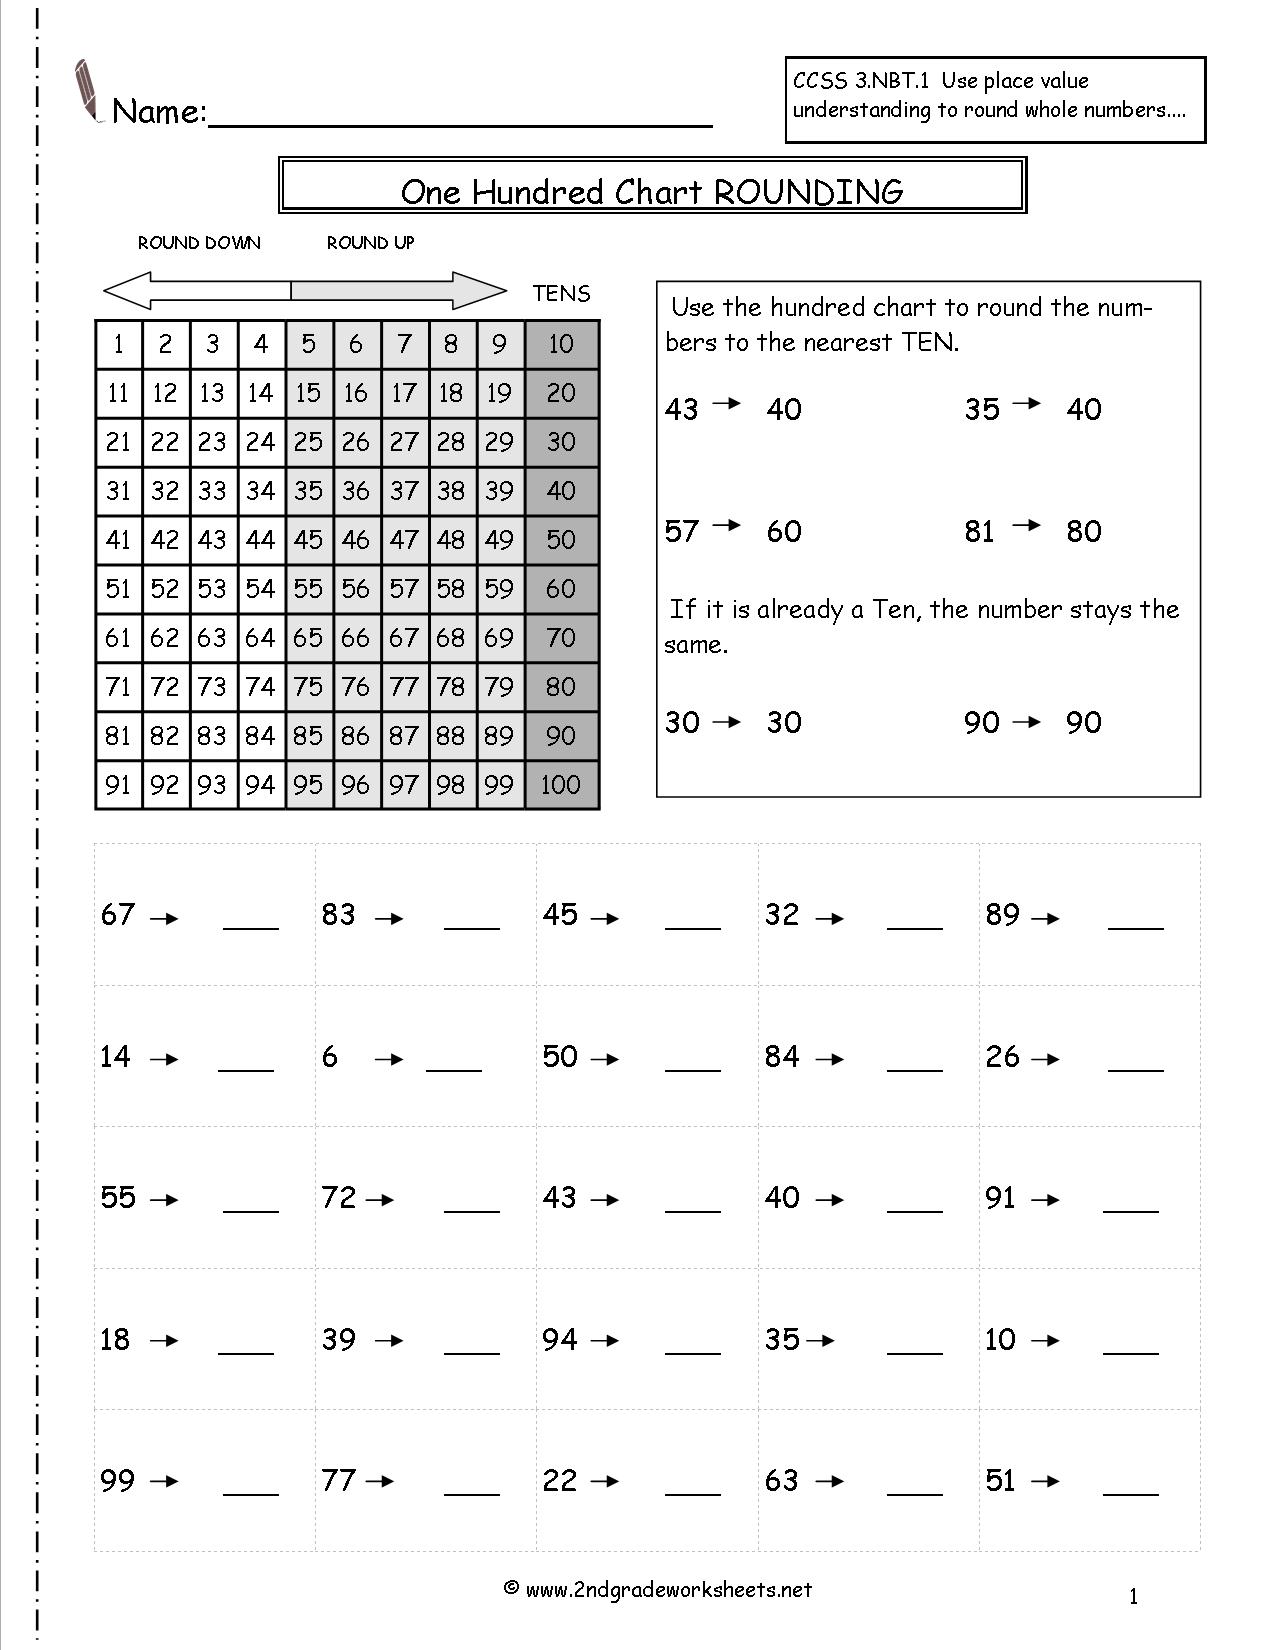 12-best-images-of-adding-whole-numbers-worksheet-rounding-whole-numbers-worksheets-printable